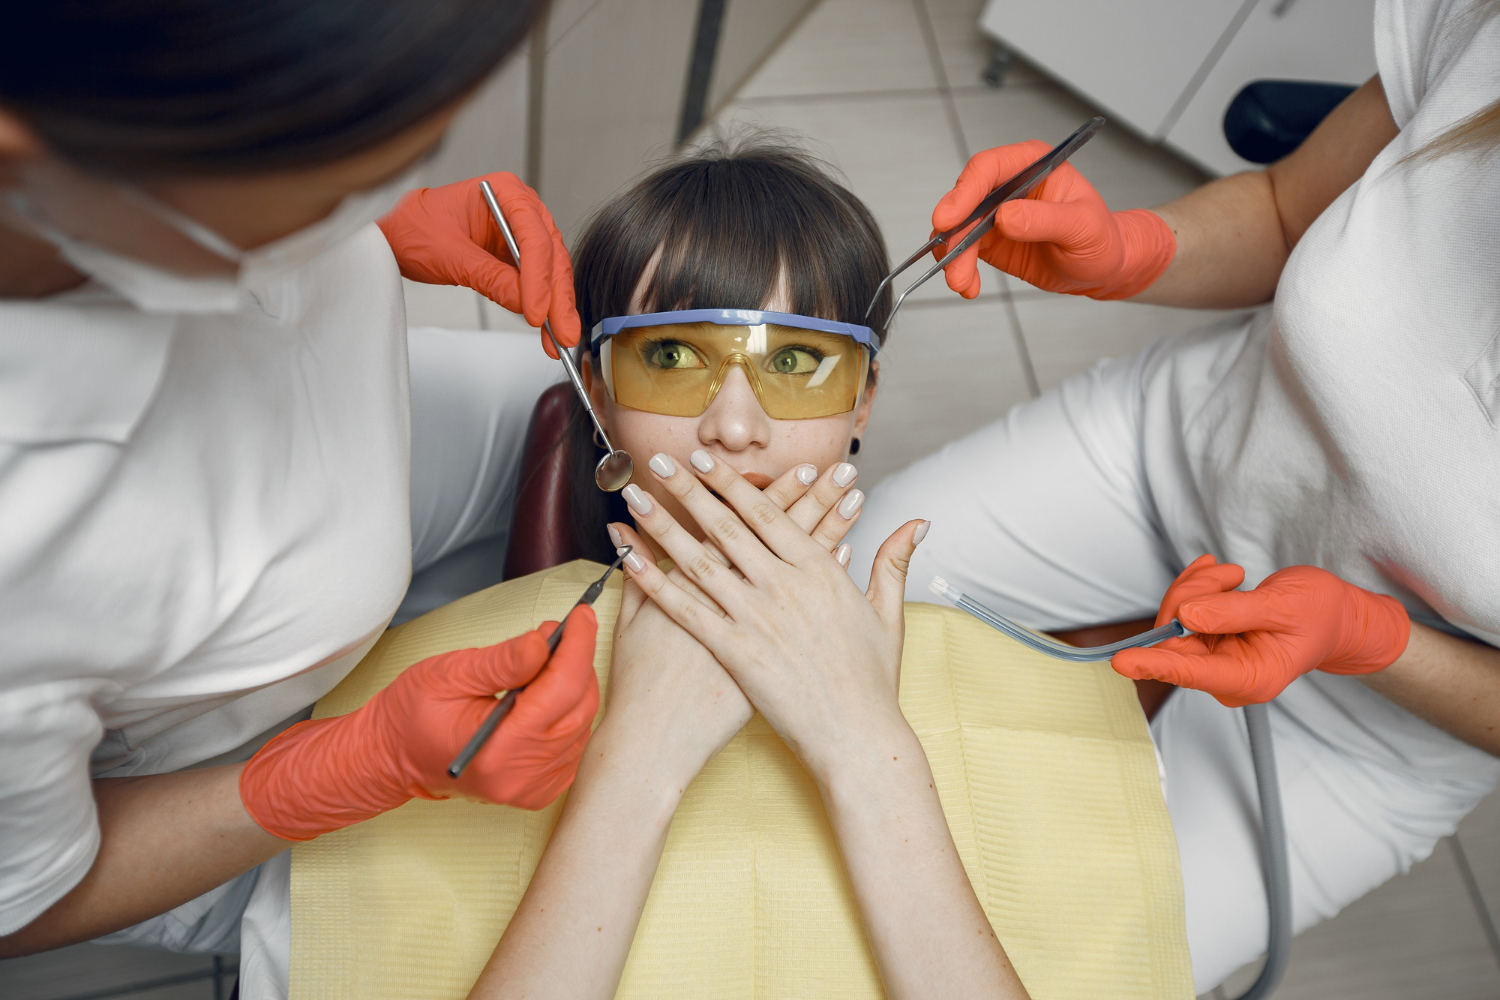 woman-dental-chair-girl-covers-her-mouth-dentists-treat-girl-s-teeth1